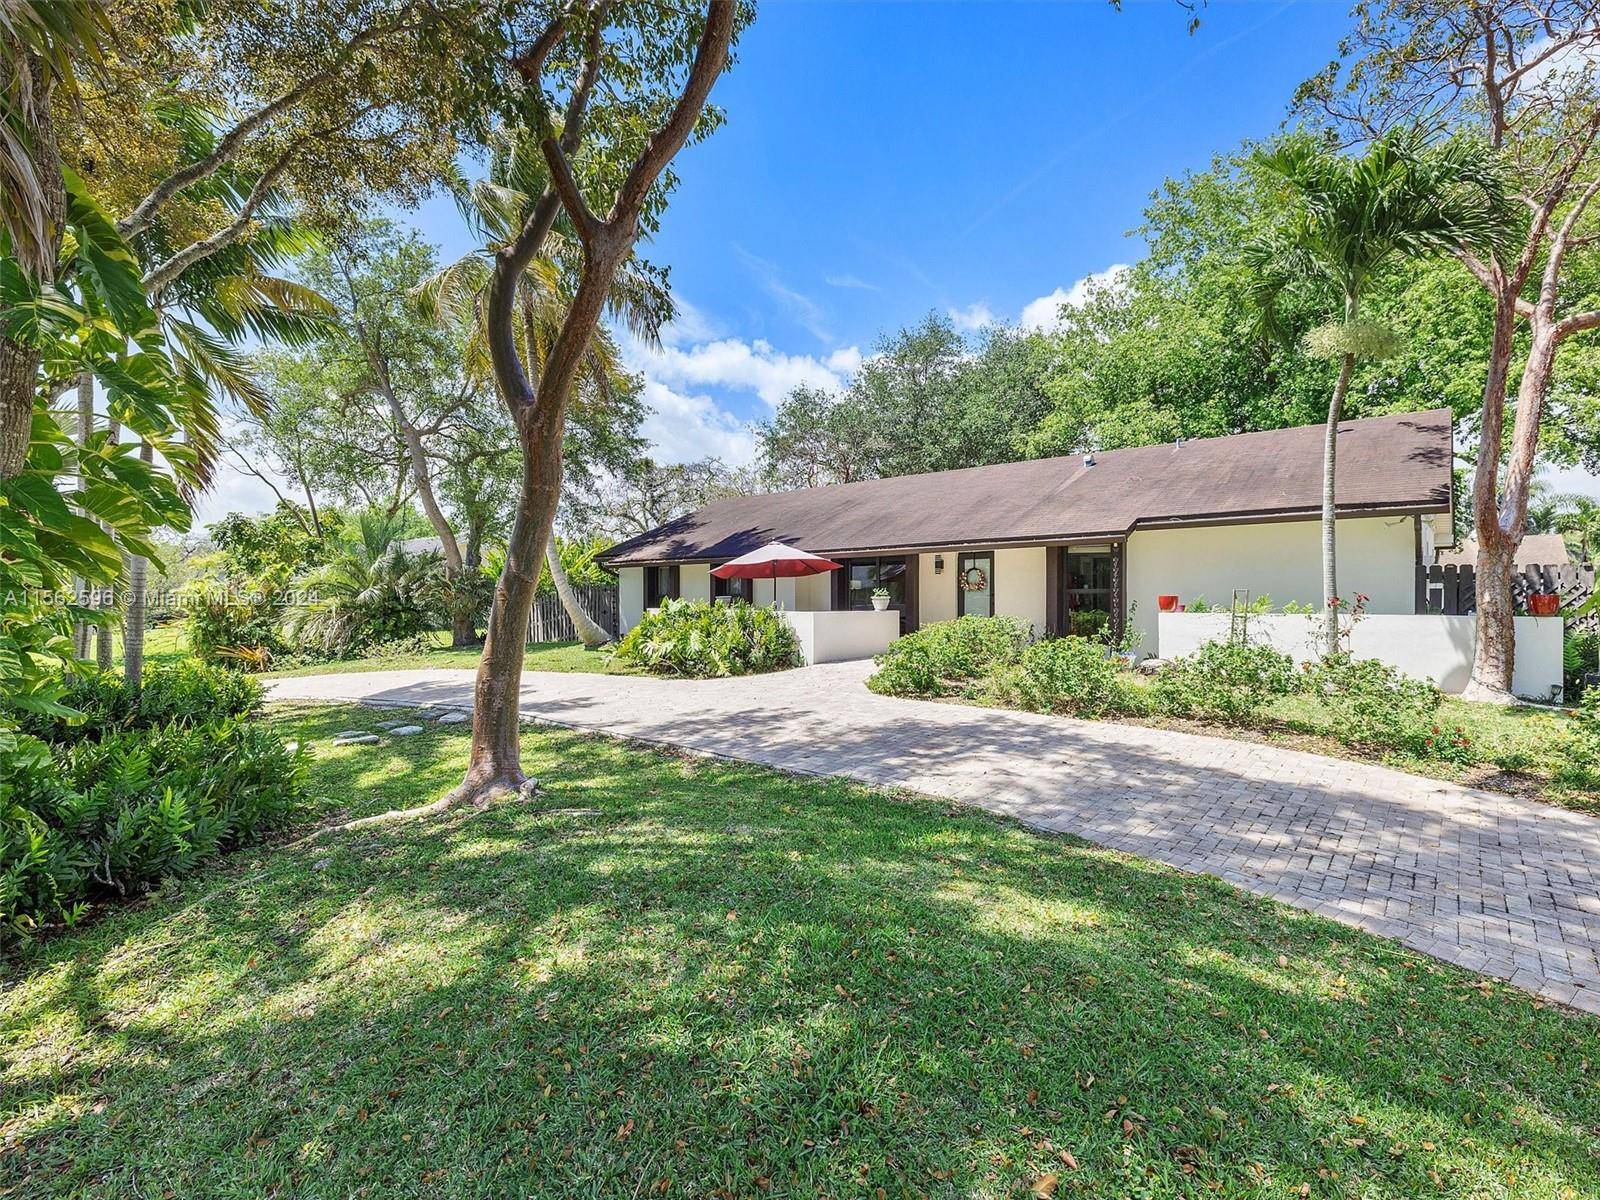 Situated near Black Point Marina, this spacious Cutler Bay home offers a myriad of desirable features without the constraints of HOA regulations.